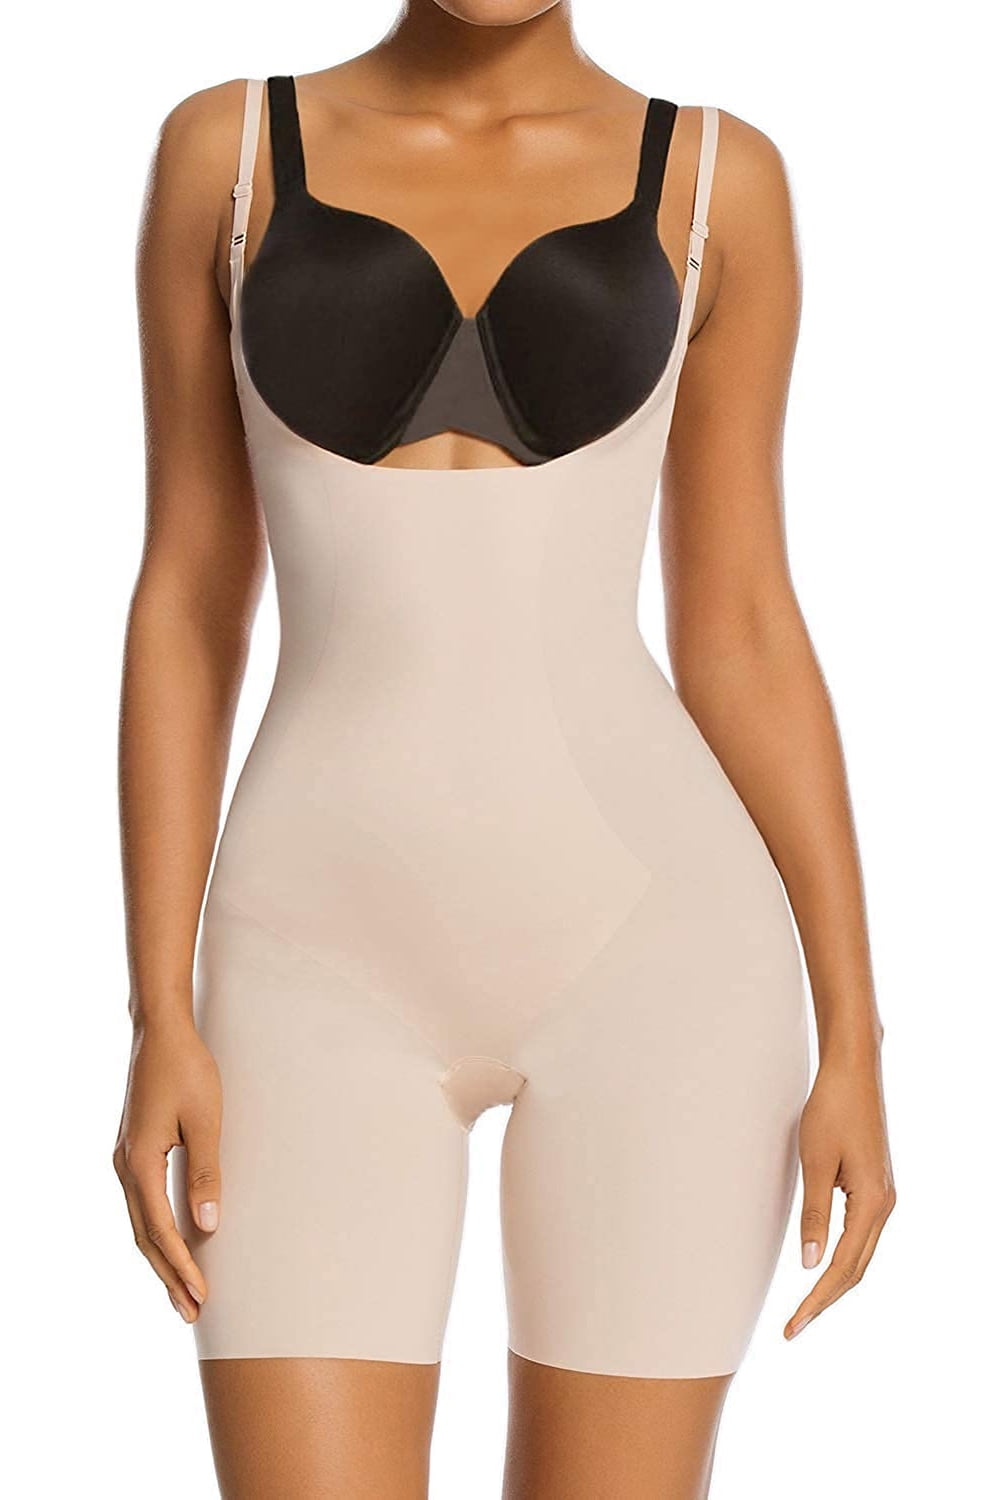 Bodysuit Shaper for Women Open Bust Shapewear with hooks Figure-shaping Body Shaper Strong Shaping Bodysuit Belly Away Shaping Thong Firm Control Body Slimmer Bodysuits Slimming Body Shaper Briefer 